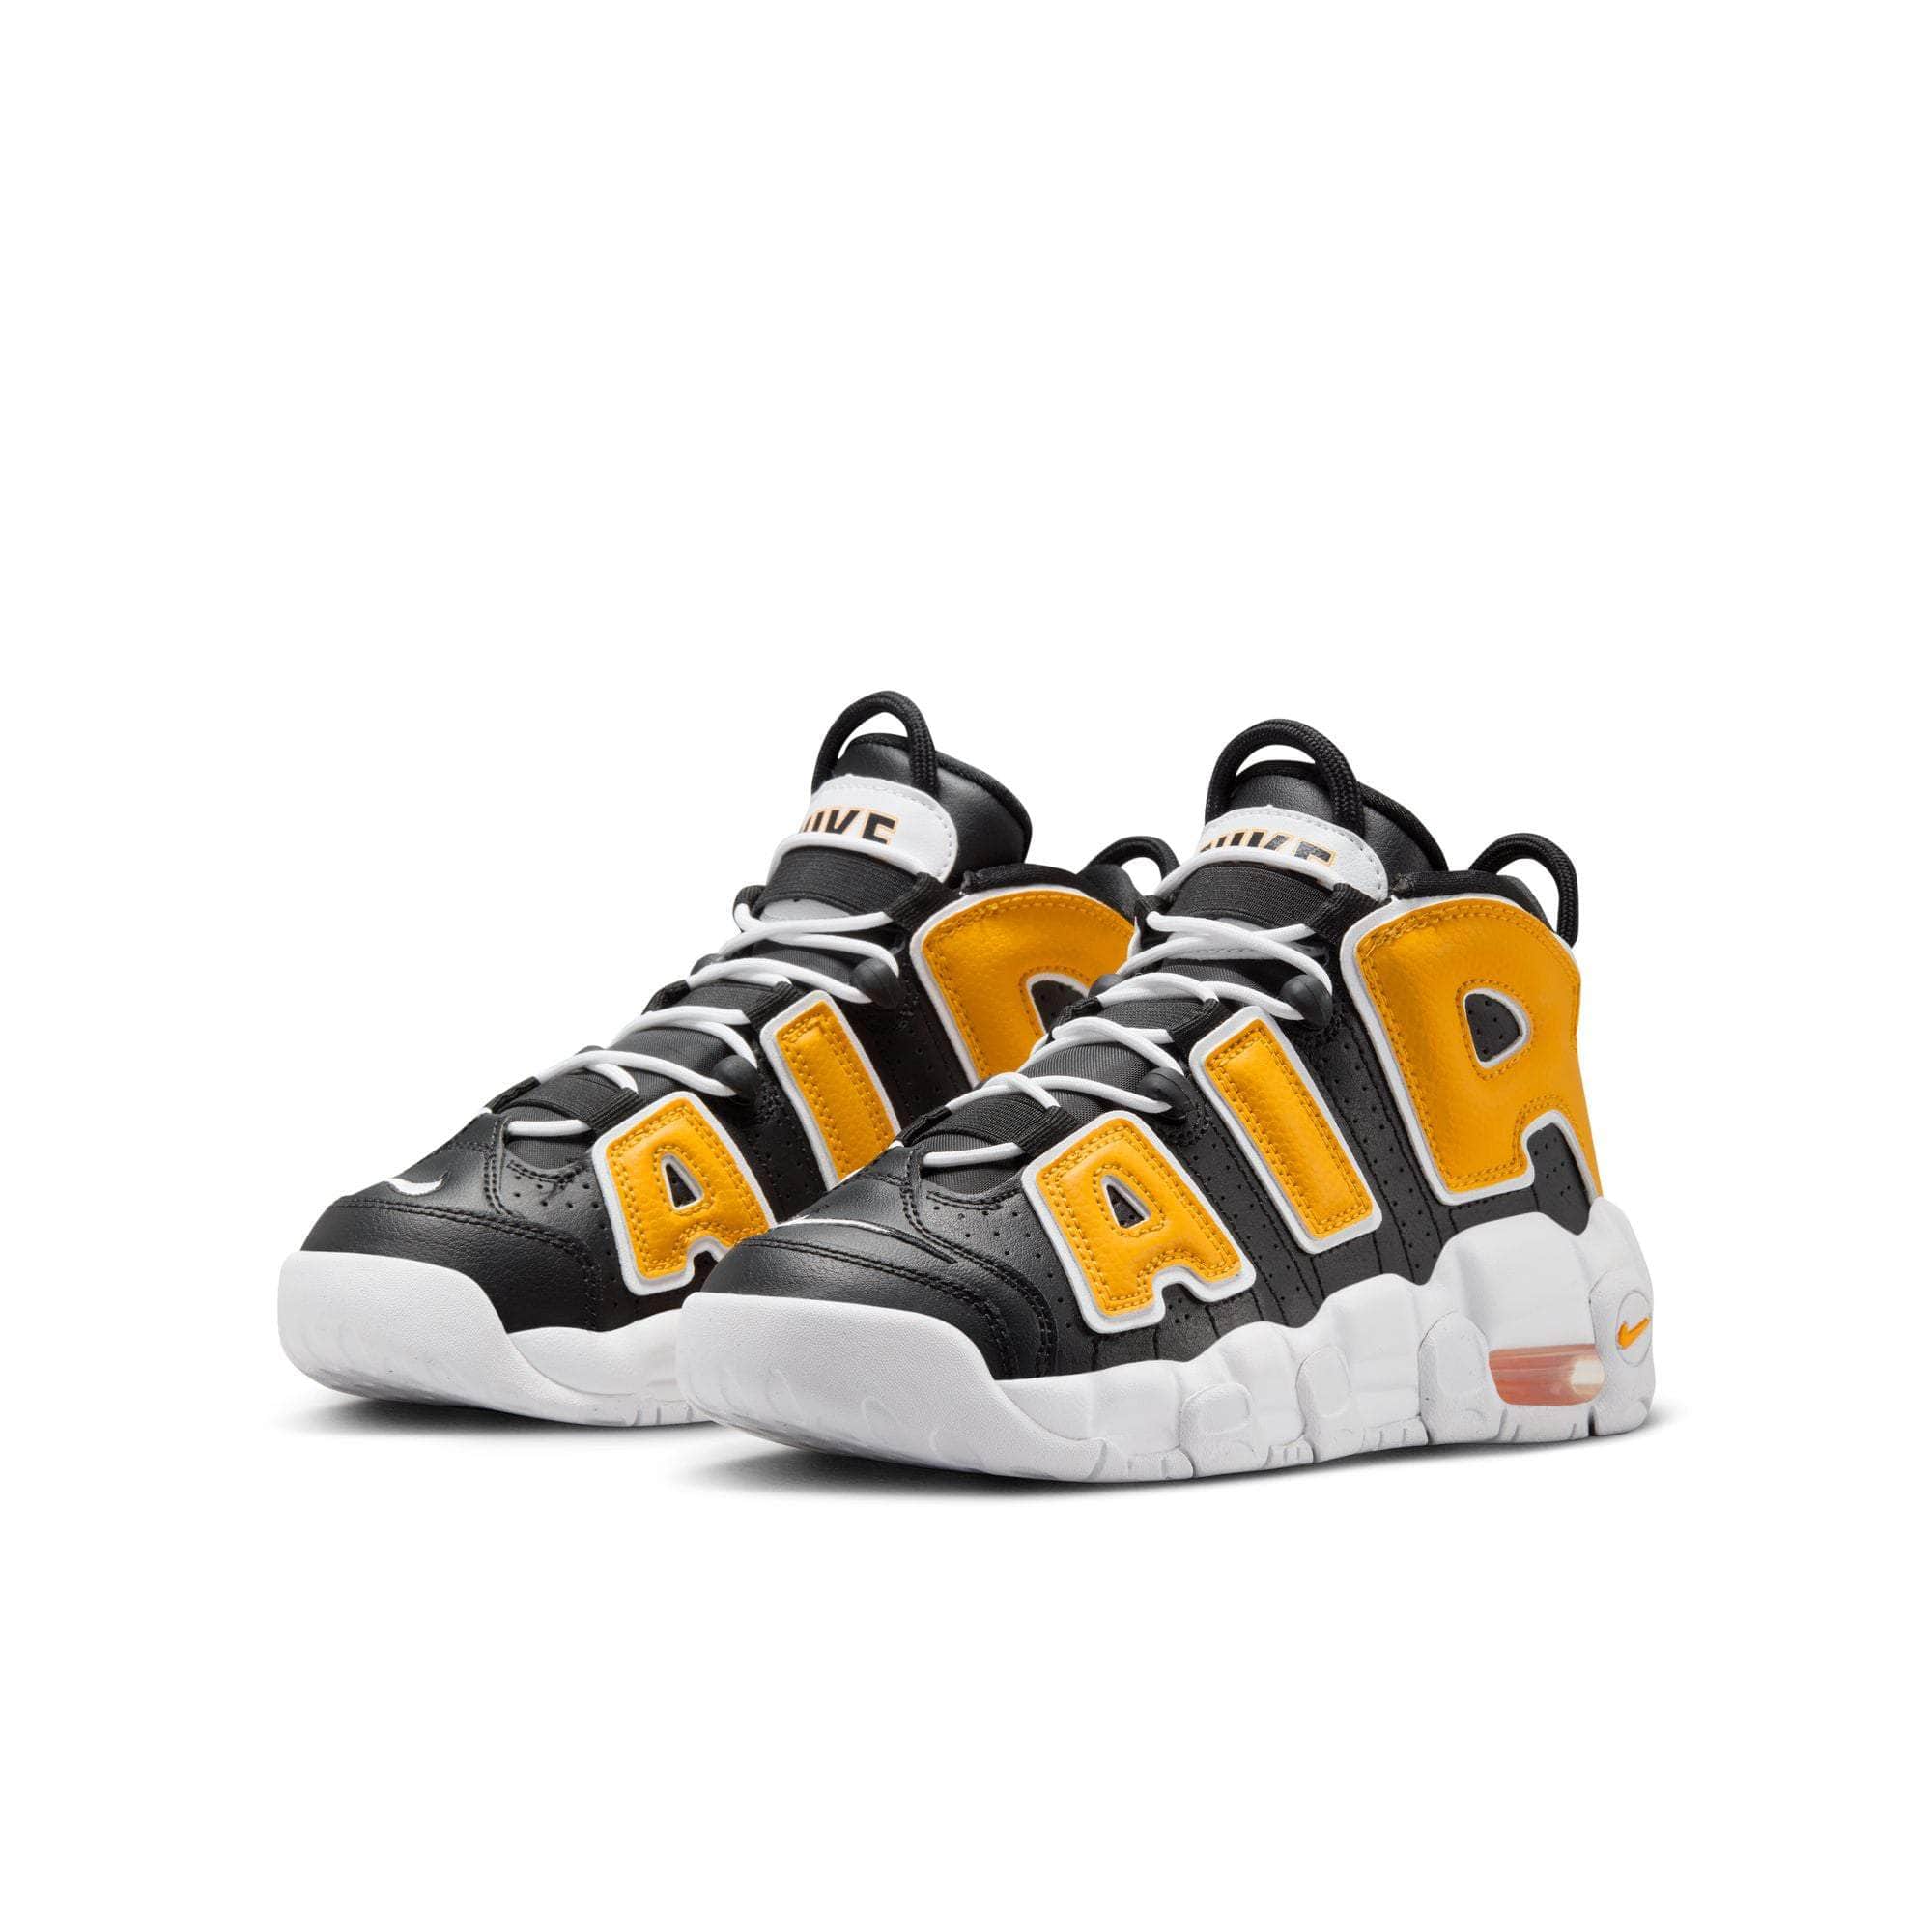 Nike Footwear Nike Air More Uptempo “Be True To Her School” - Boy's GS